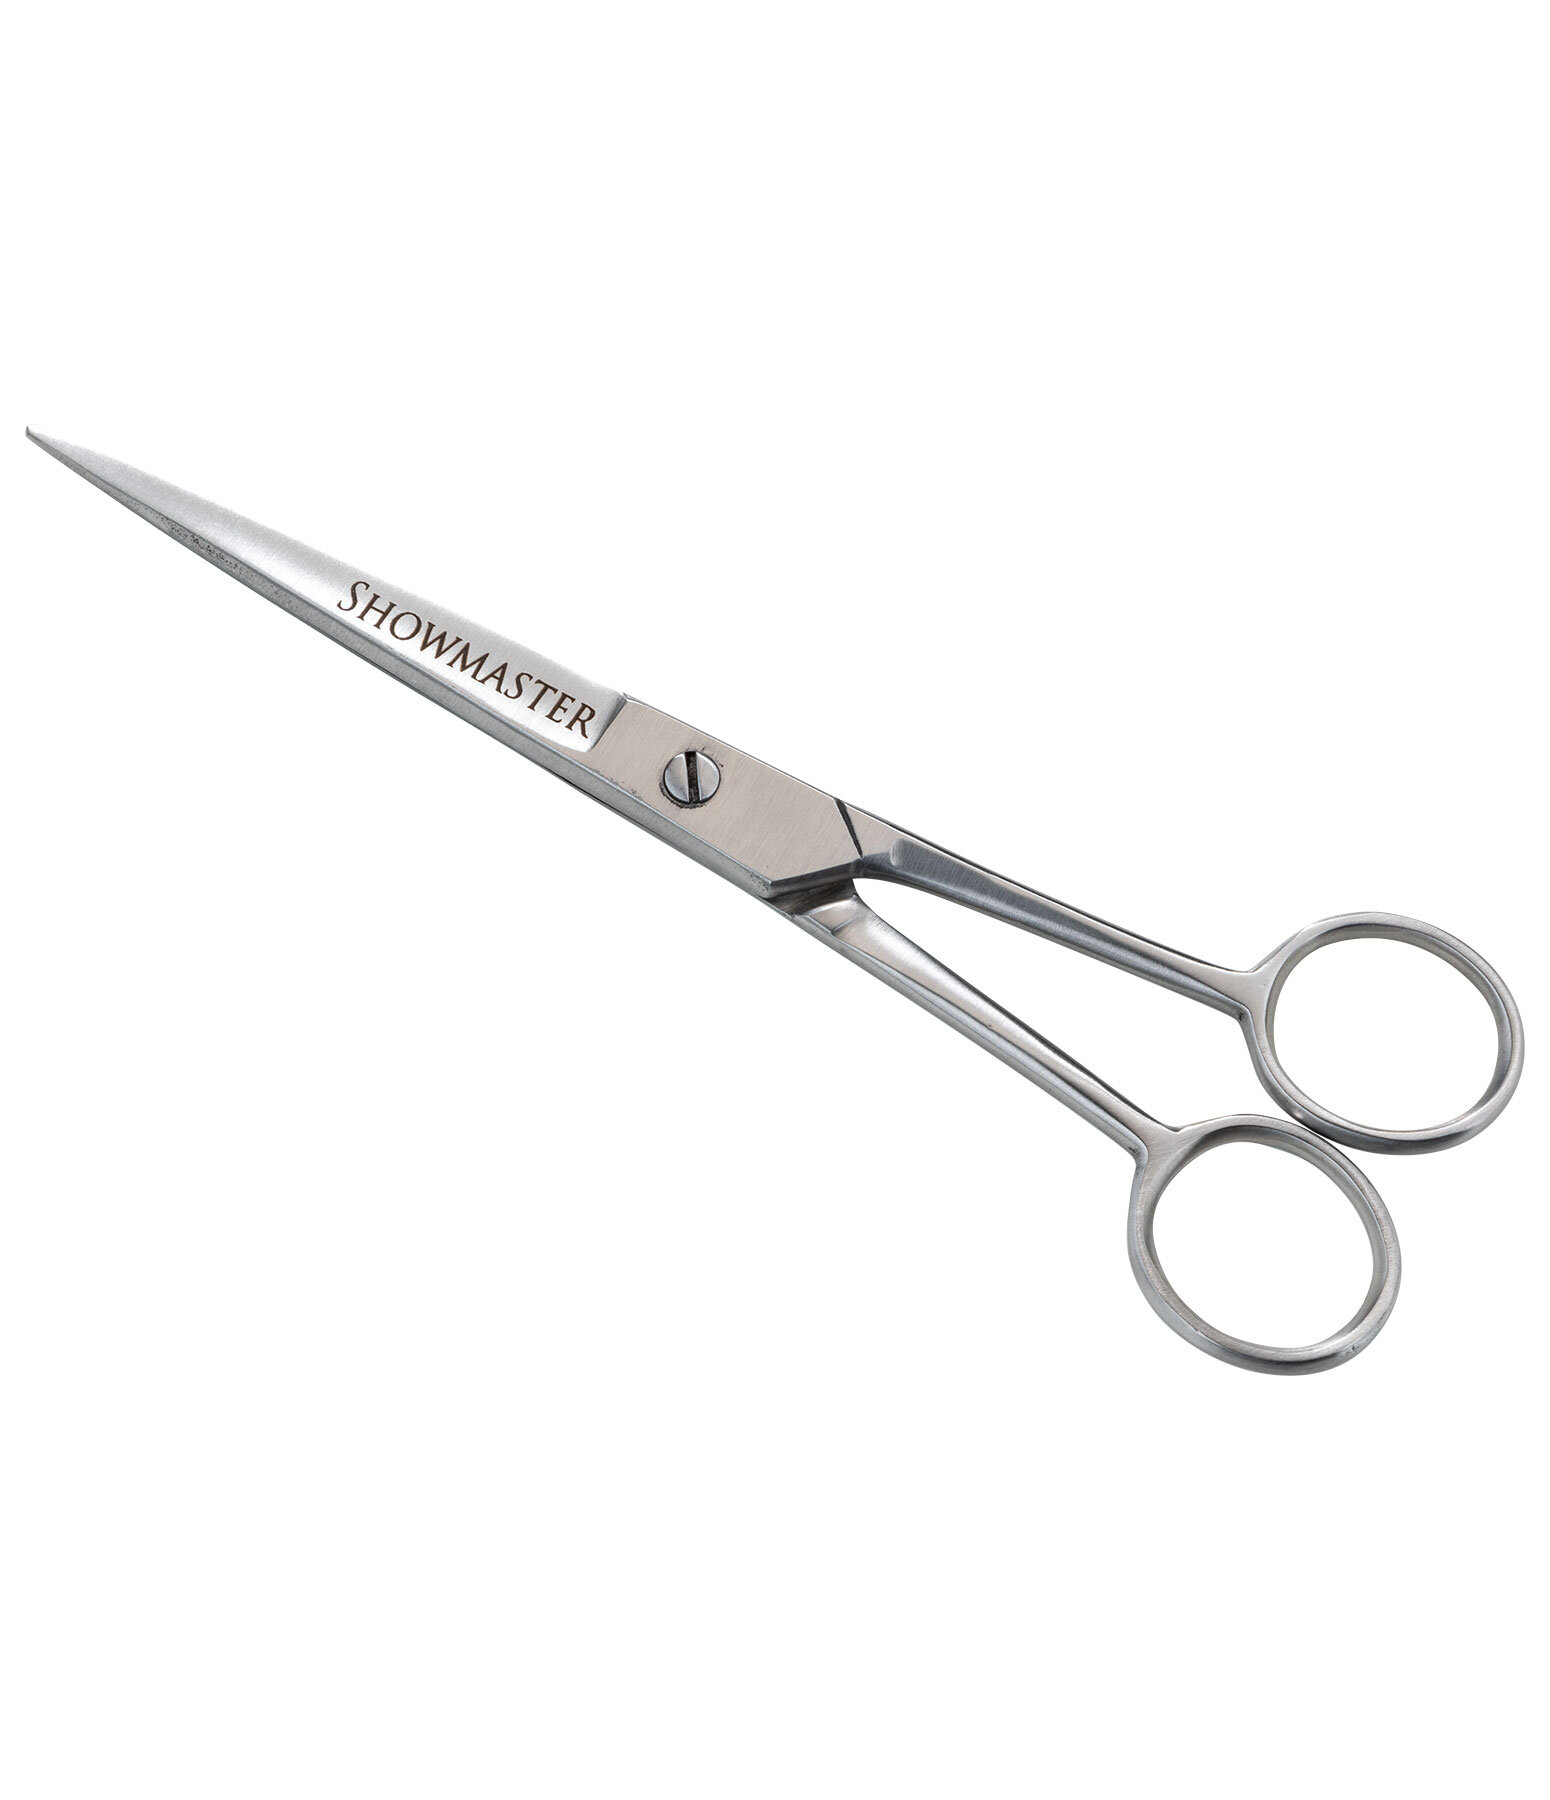 Tail and Mane Scissors